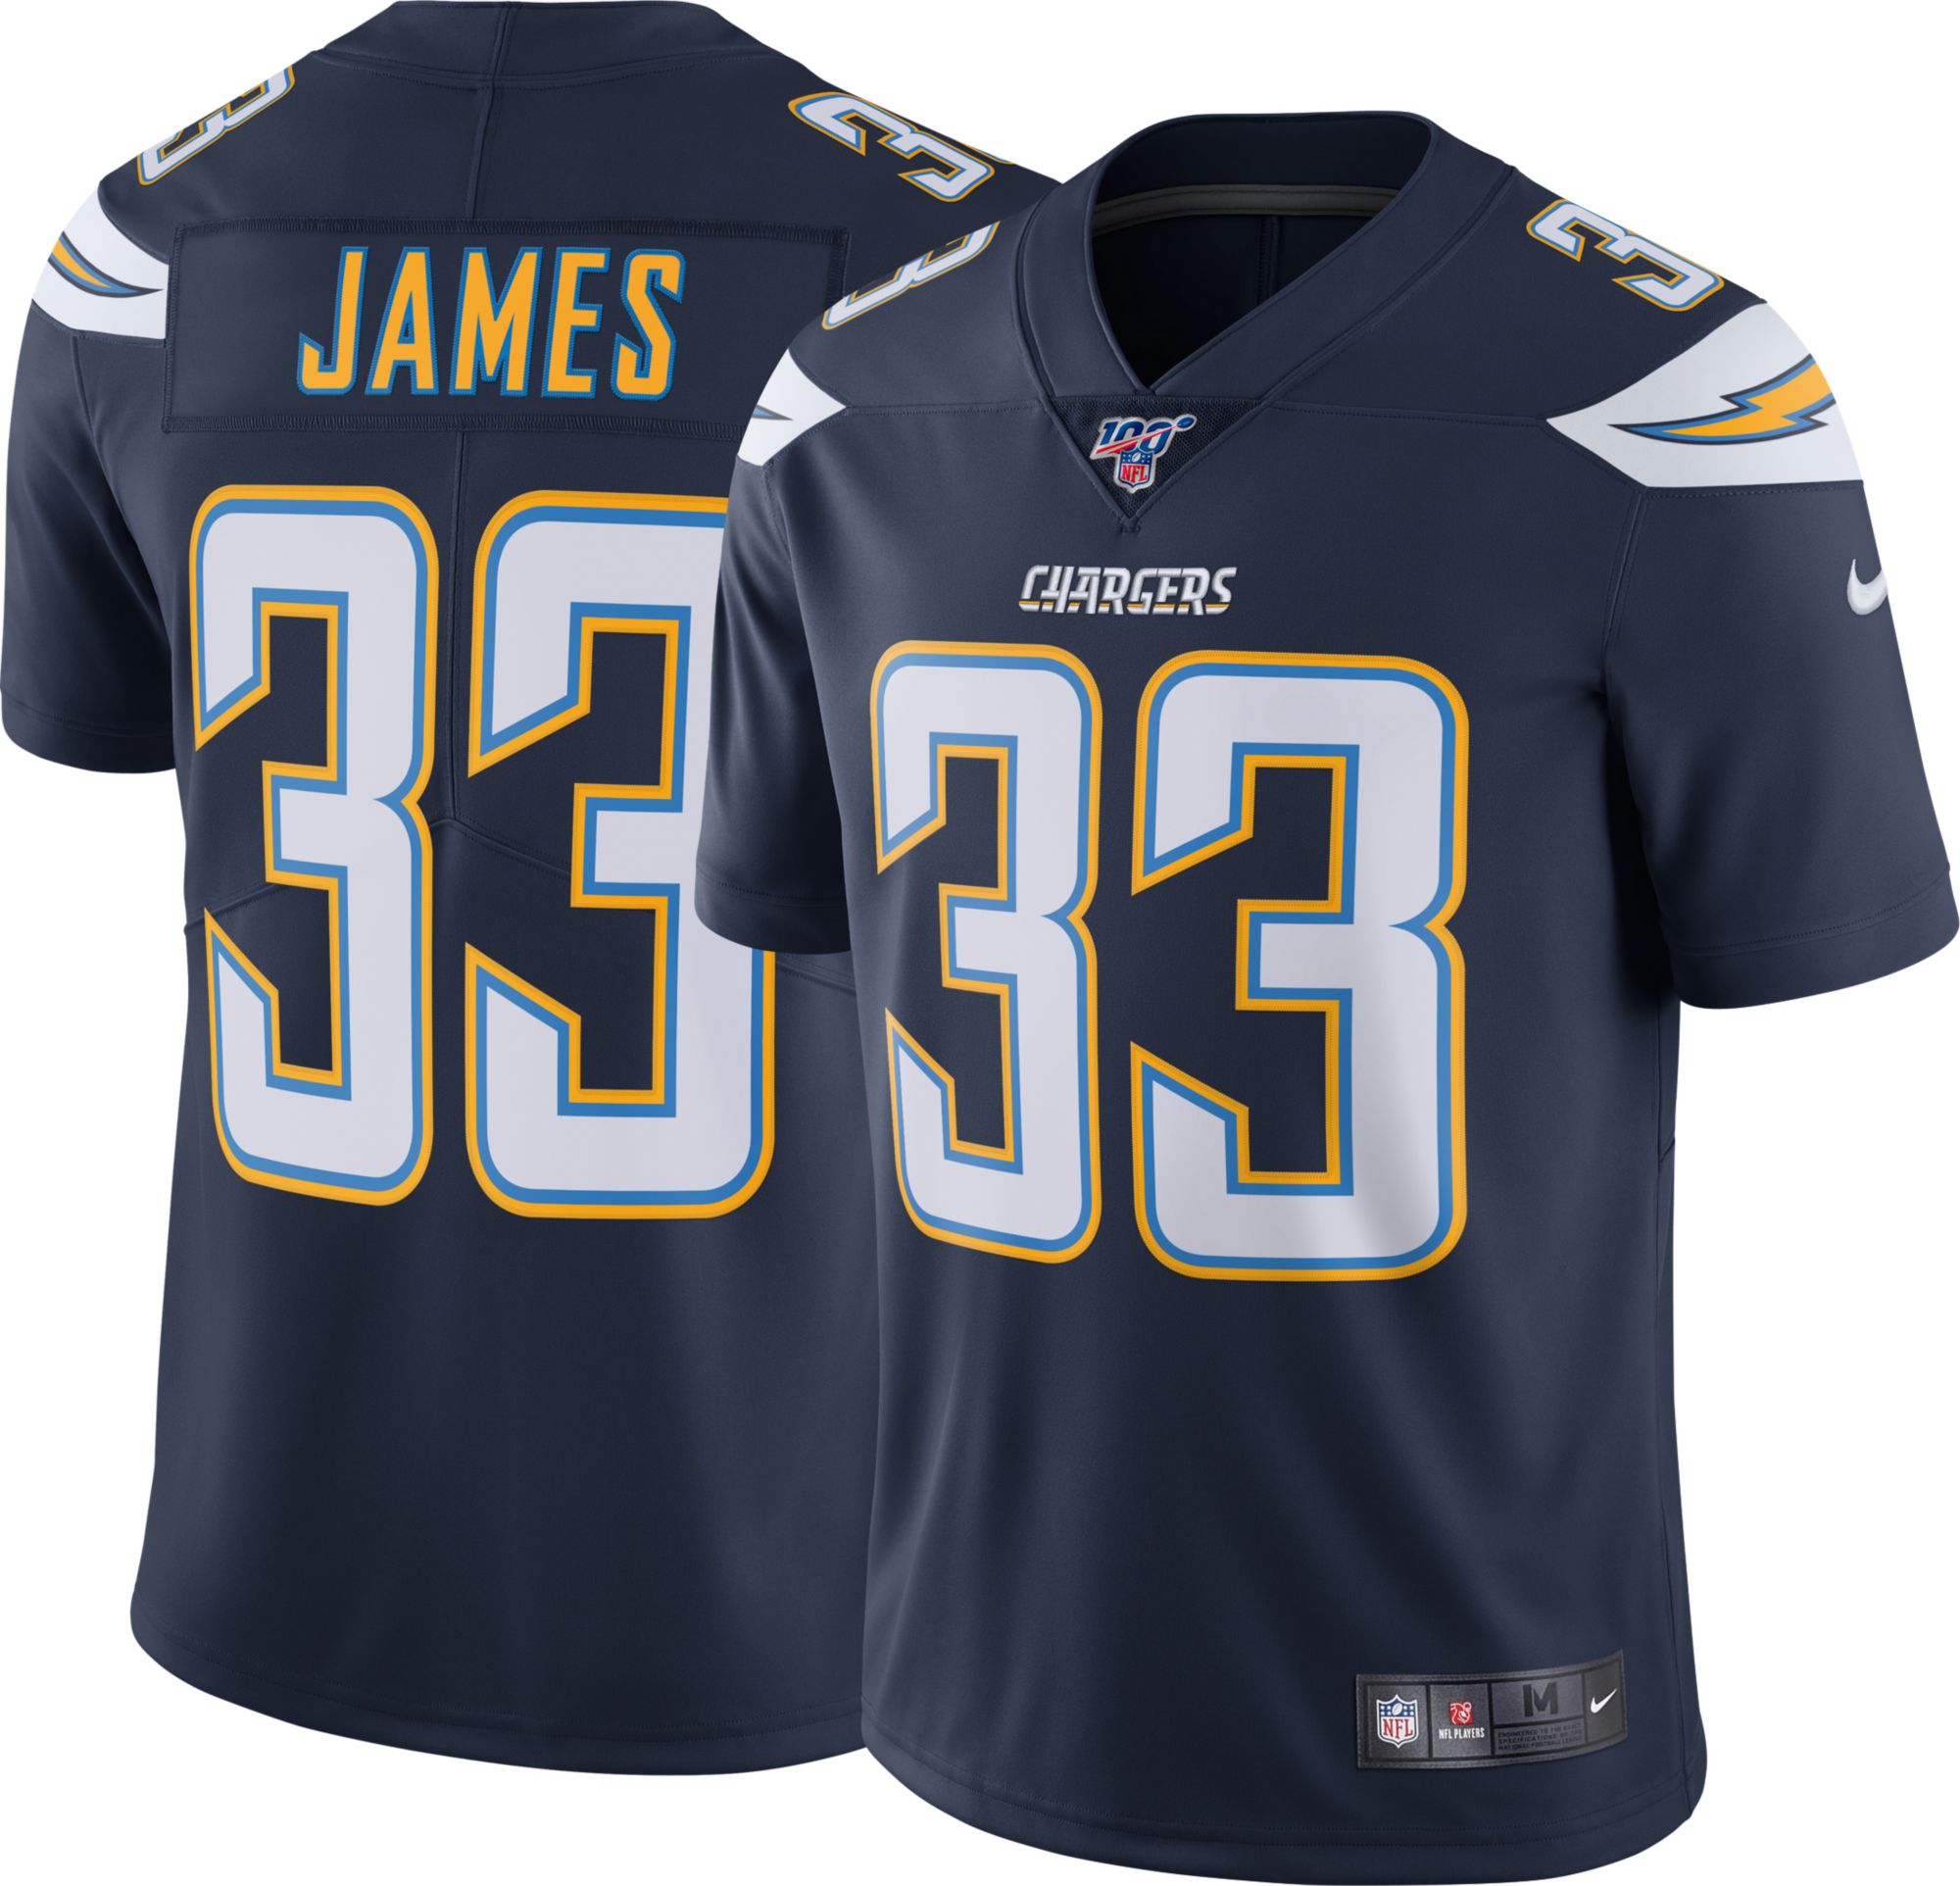 sports jersey stores in los angeles